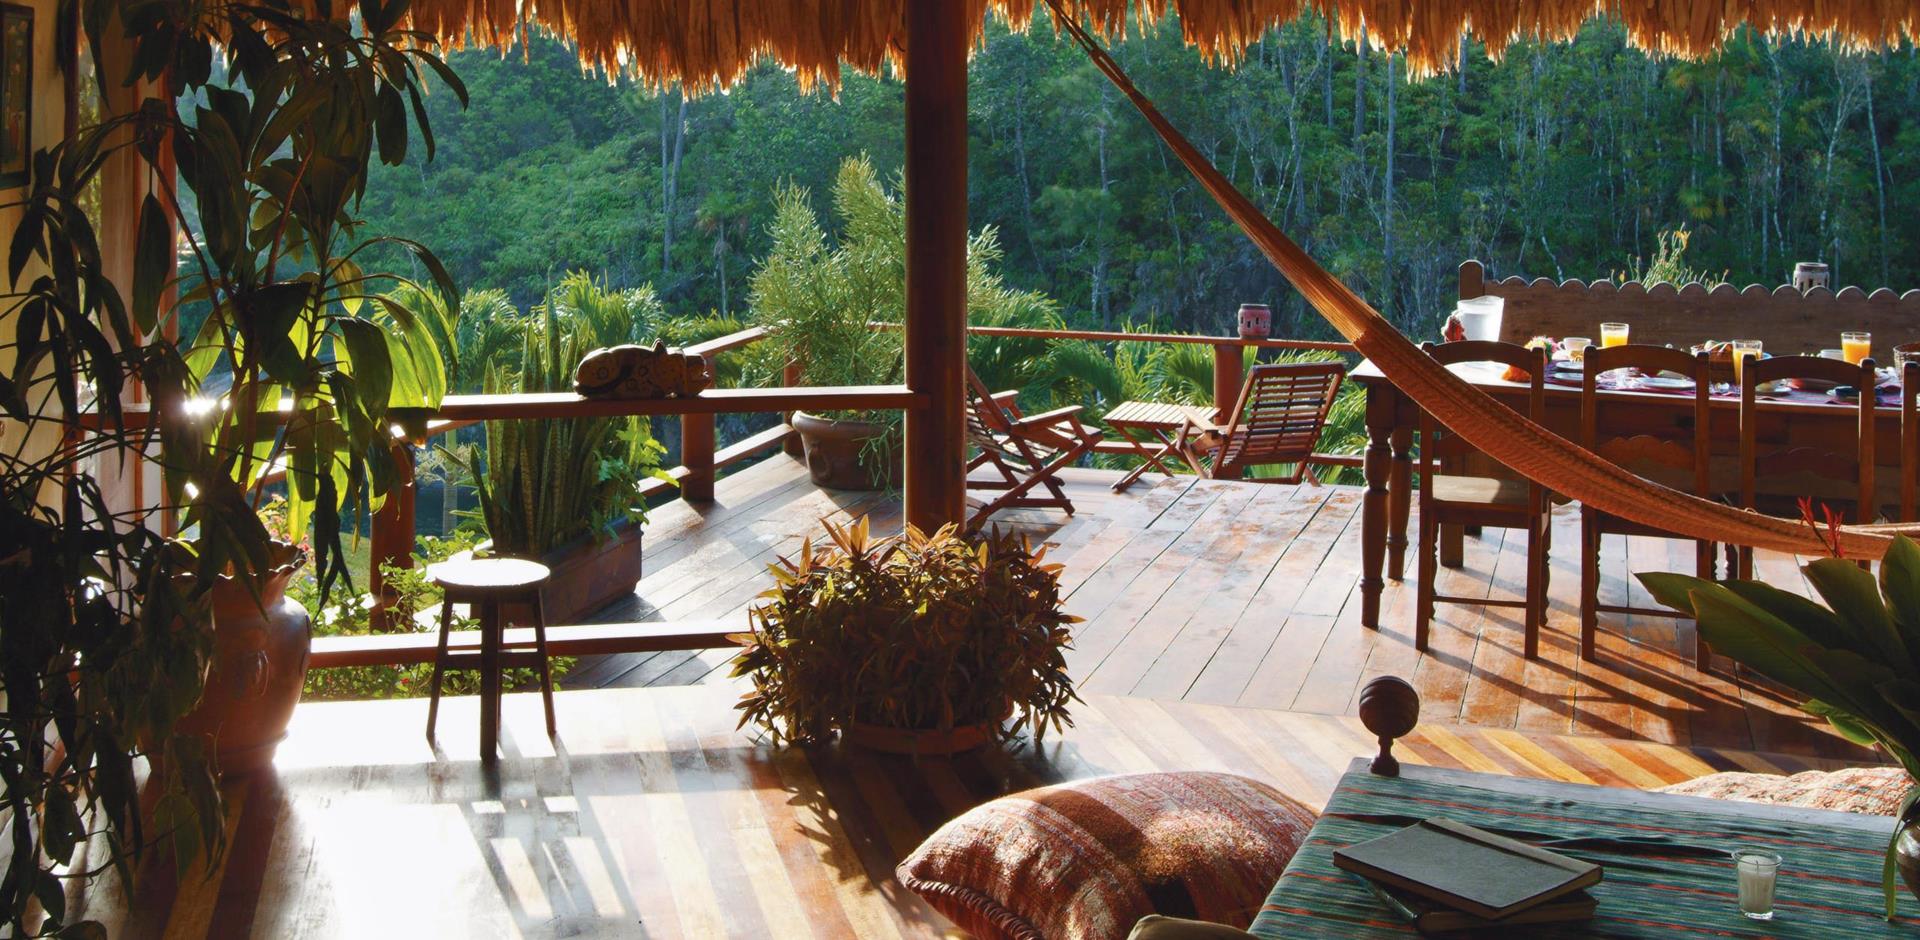 Dining area with view of rainforest, Blancaneaux Lodge, Mountain Pine Ridge, Belize, Central America